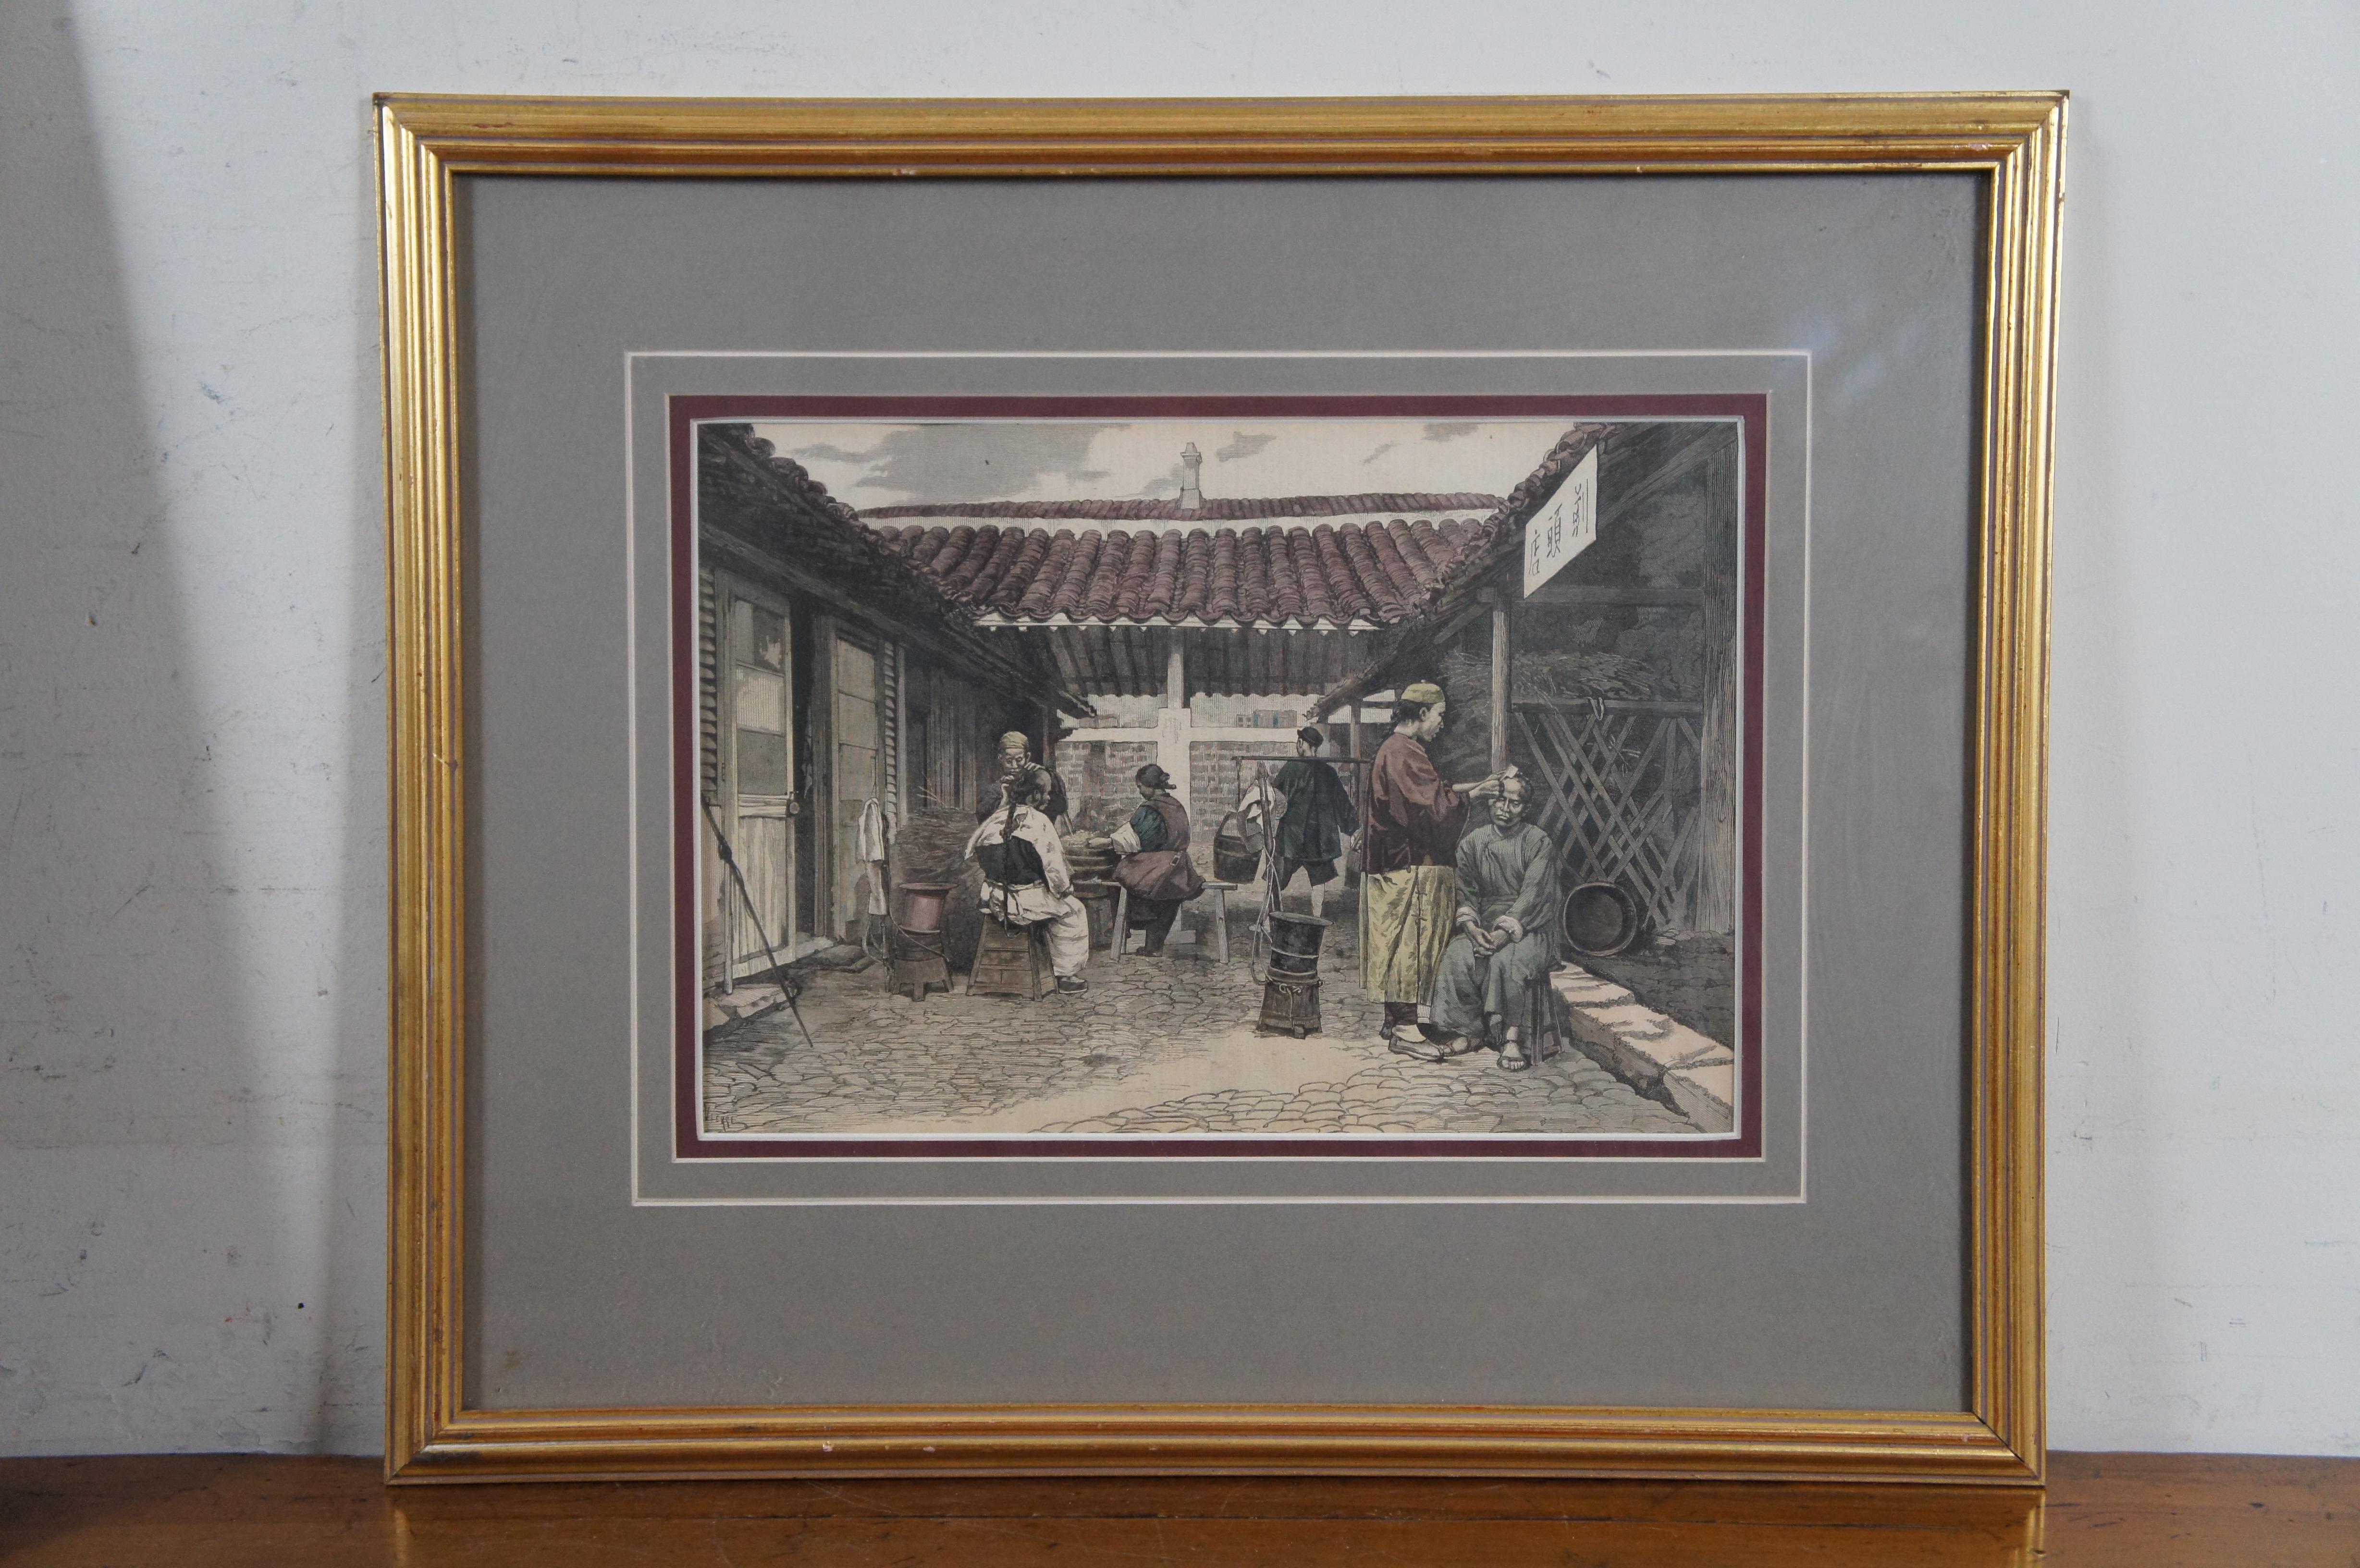 Set of 3 Framed 19th C. Hand Colored Engravings Chinese Culture Harpers Weekly In Good Condition For Sale In Dayton, OH